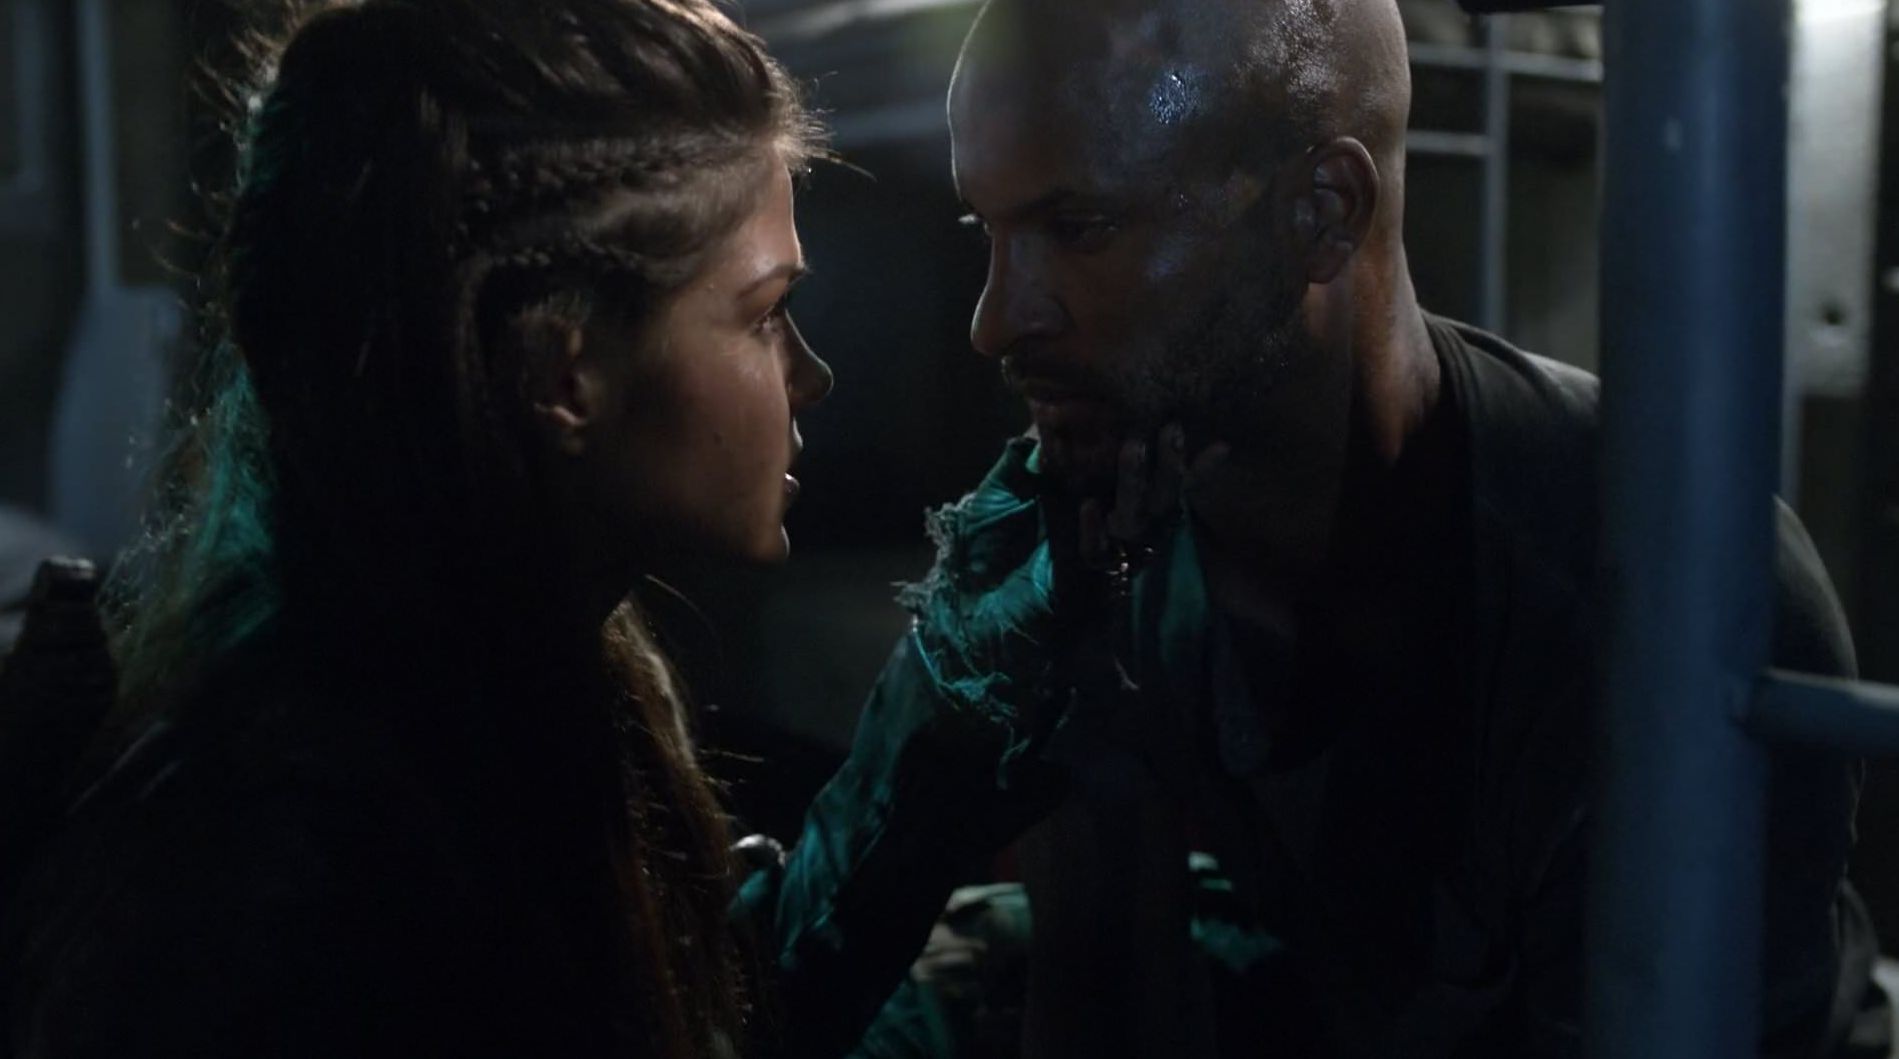 Image S3 Episode 9 Stealing Fire Octavia And Lincoln The 100 Wiki Fandom Powered By